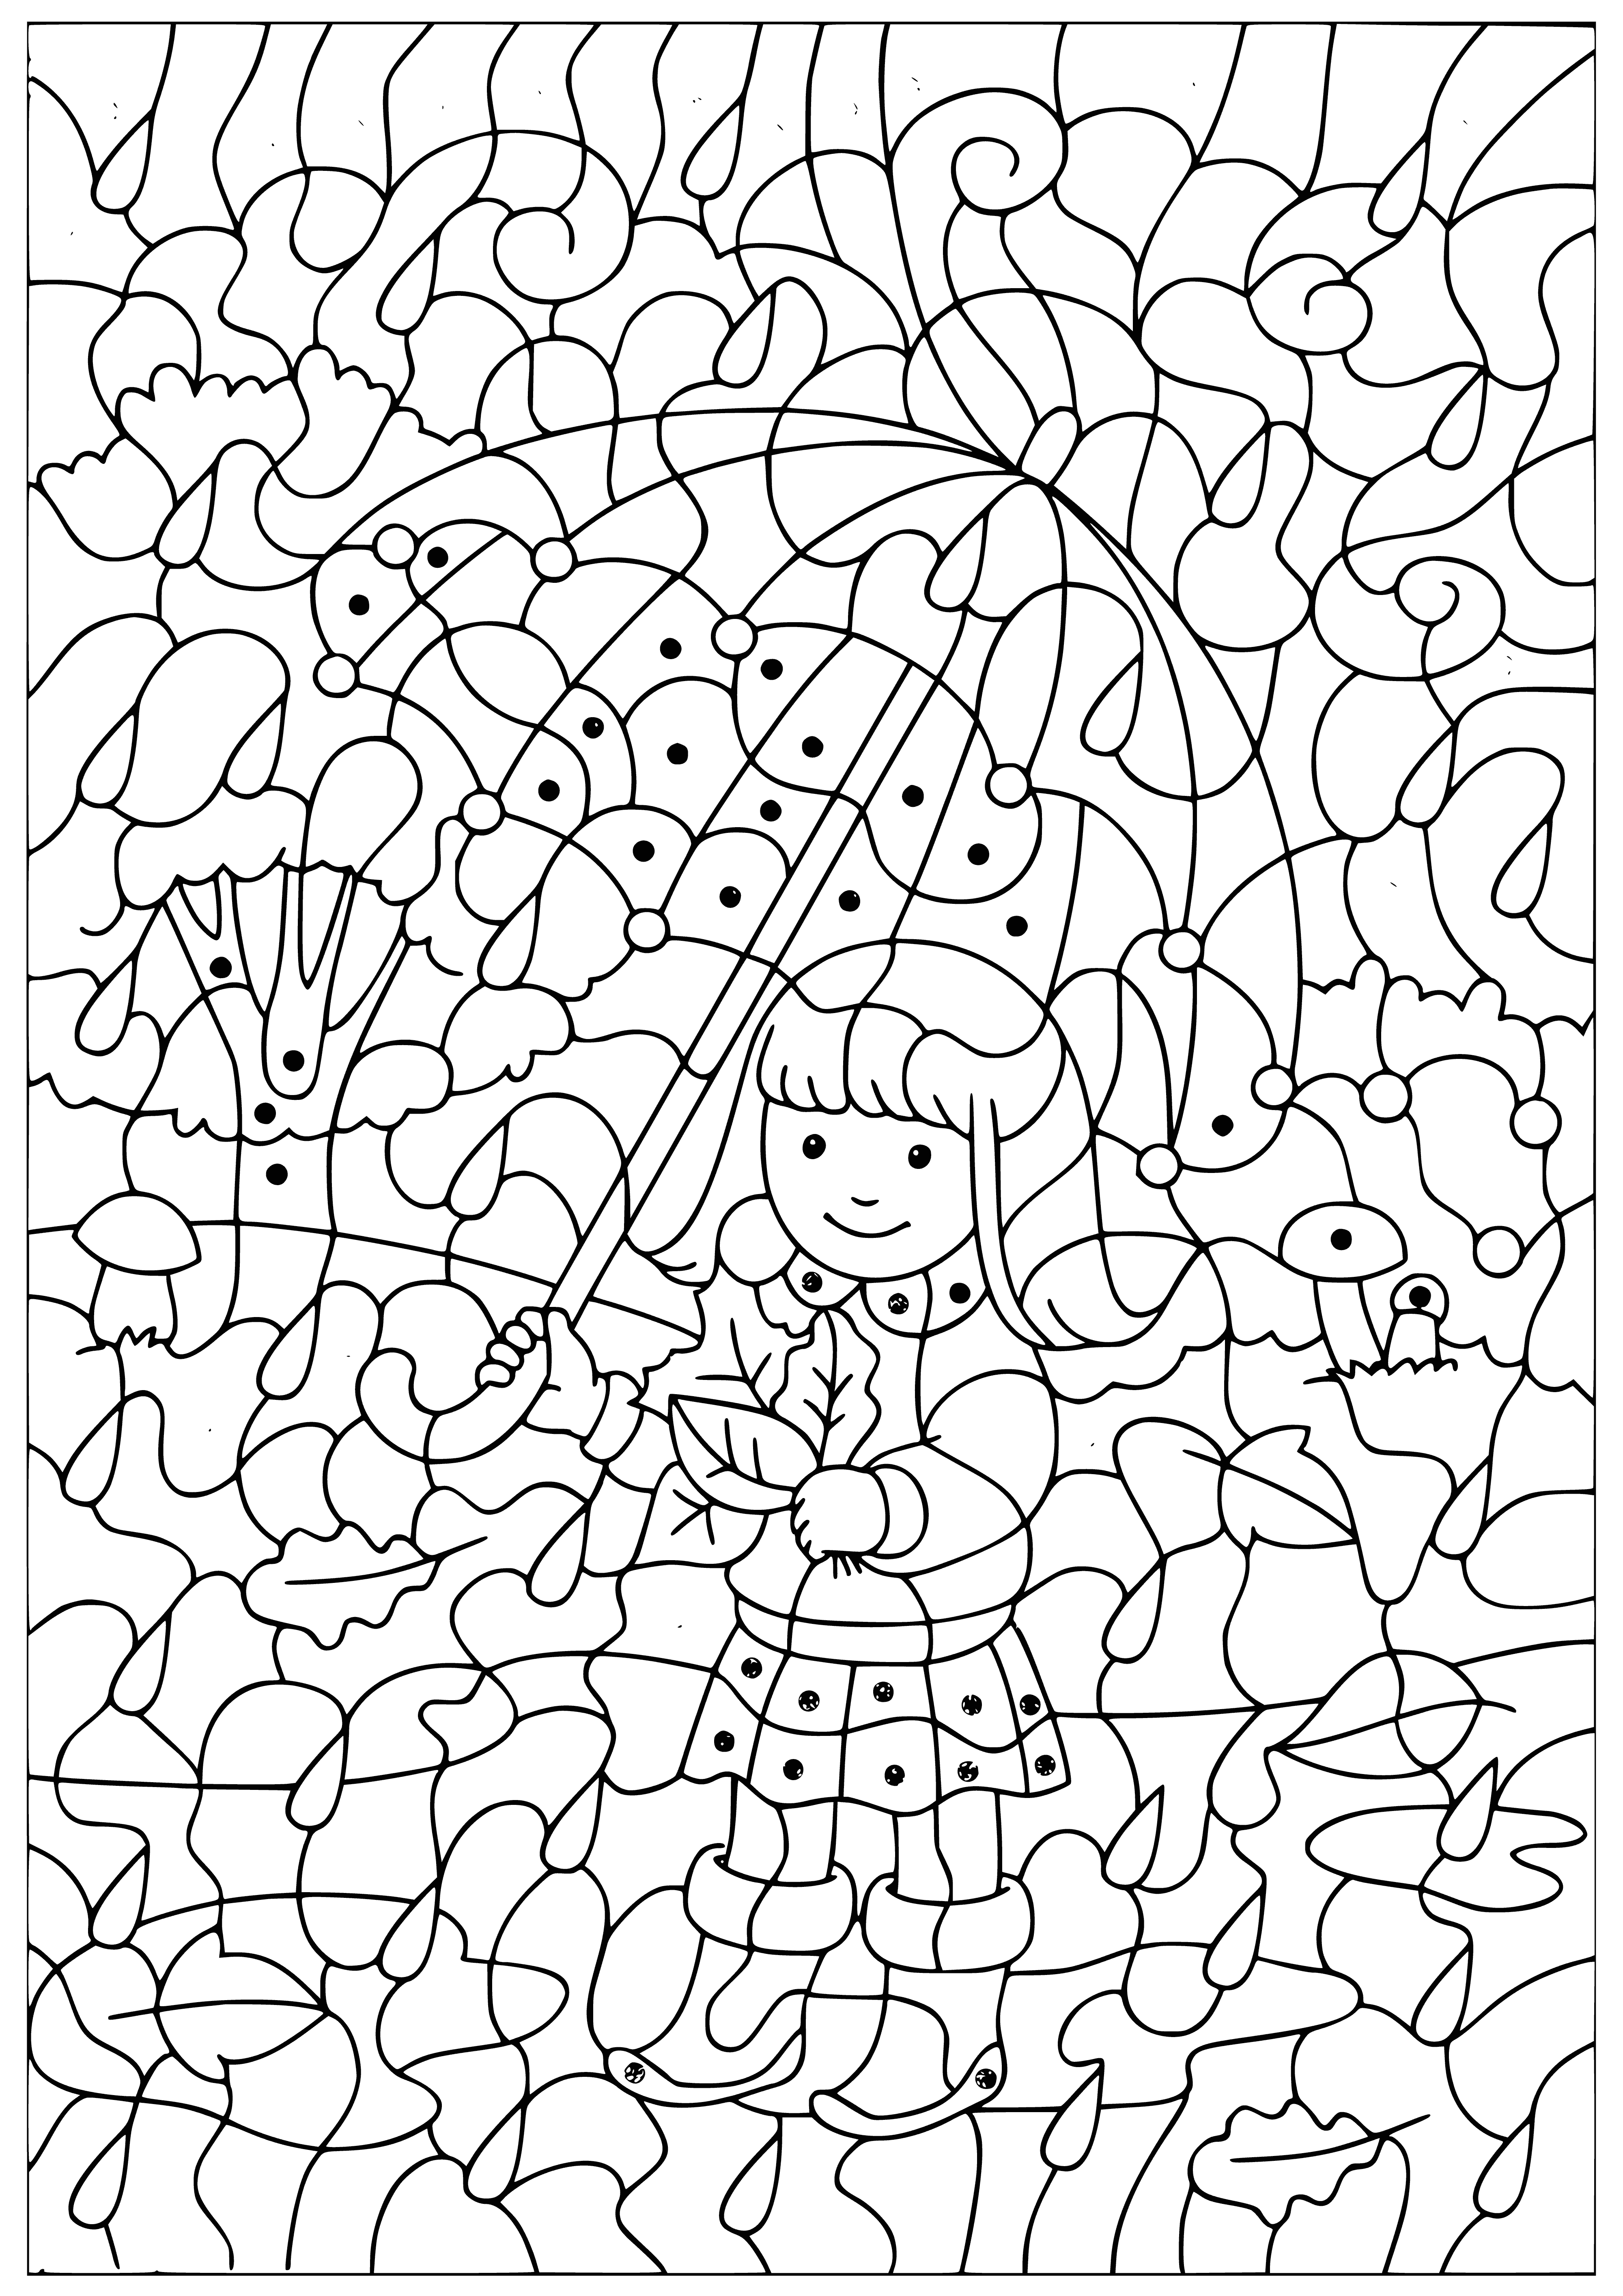 Girl under an umbrella coloring page